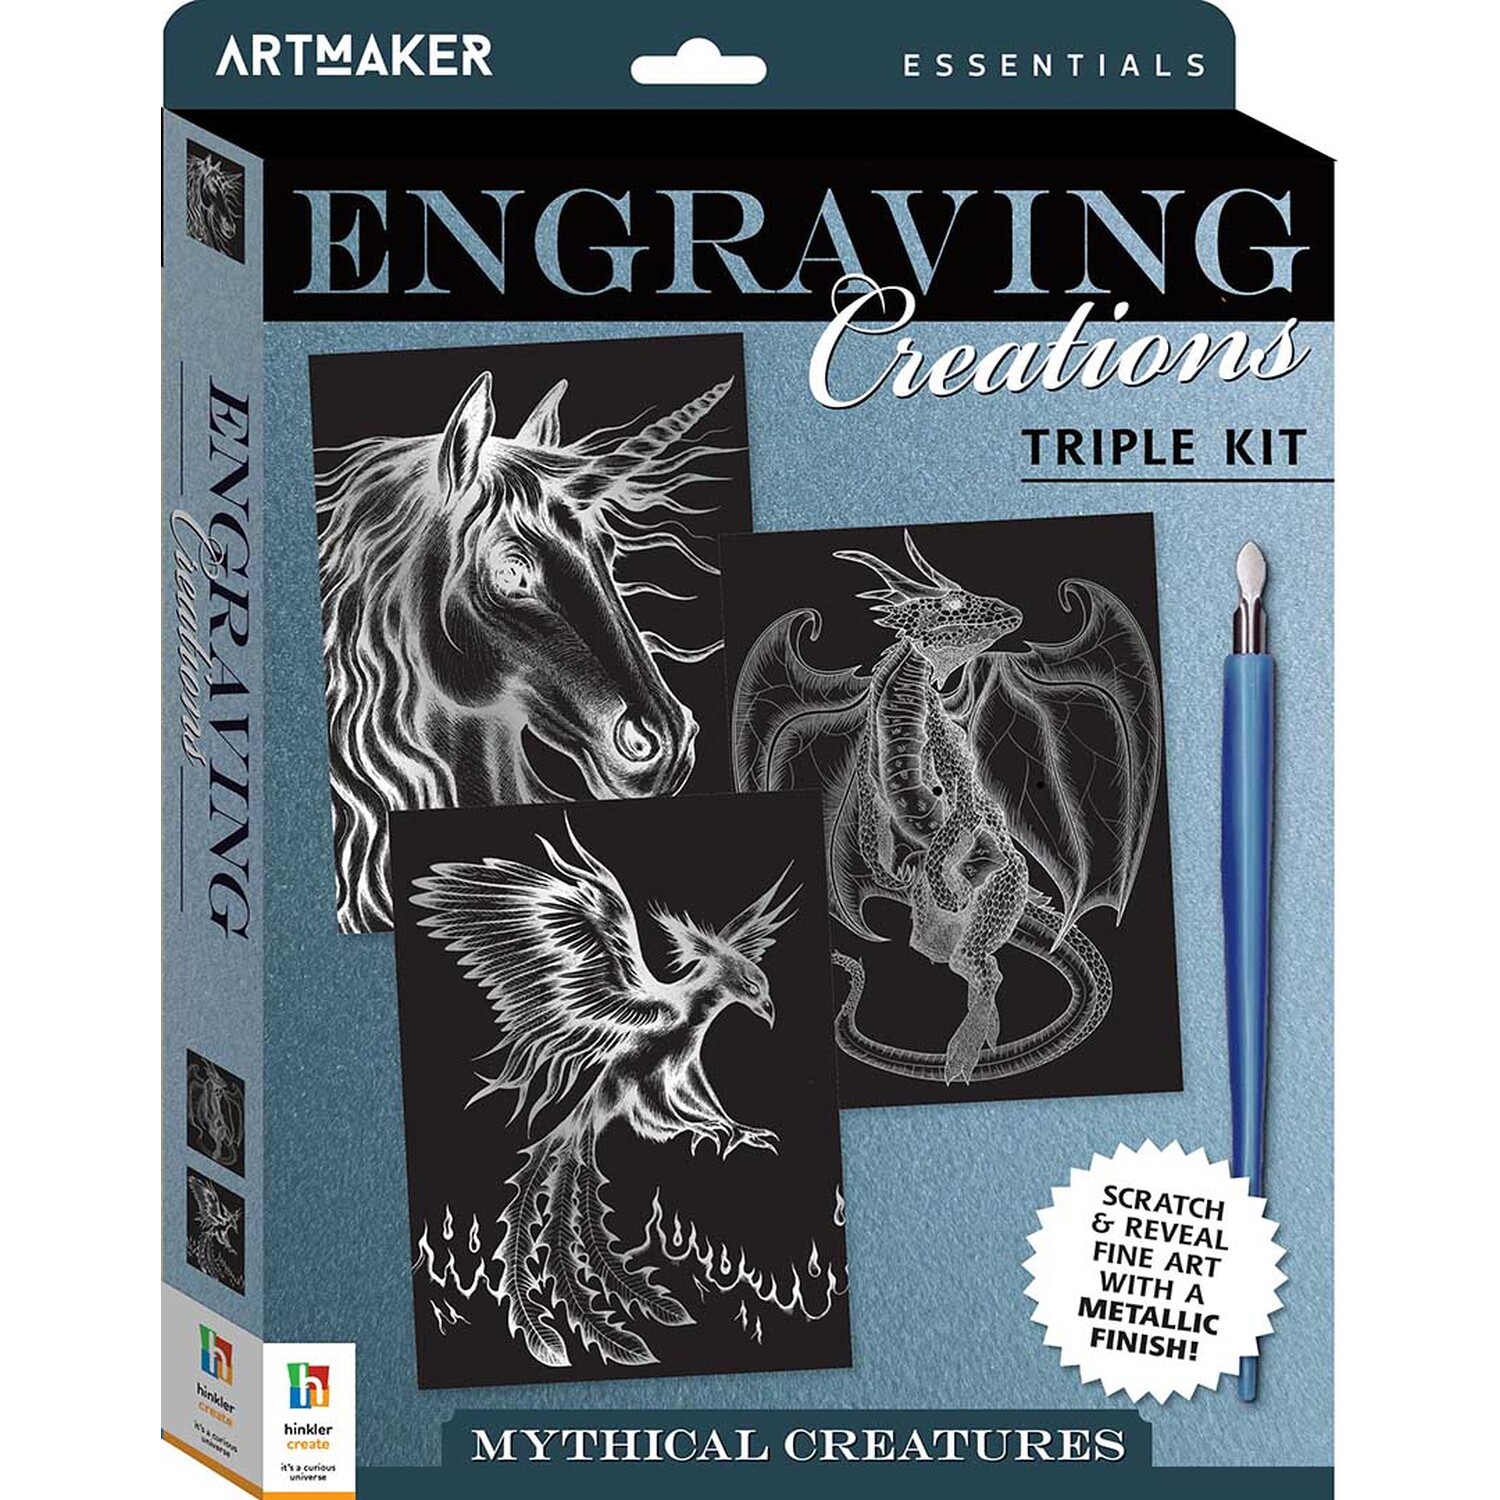 Engraving Creations Triple Kit - Mythical Creatures Image